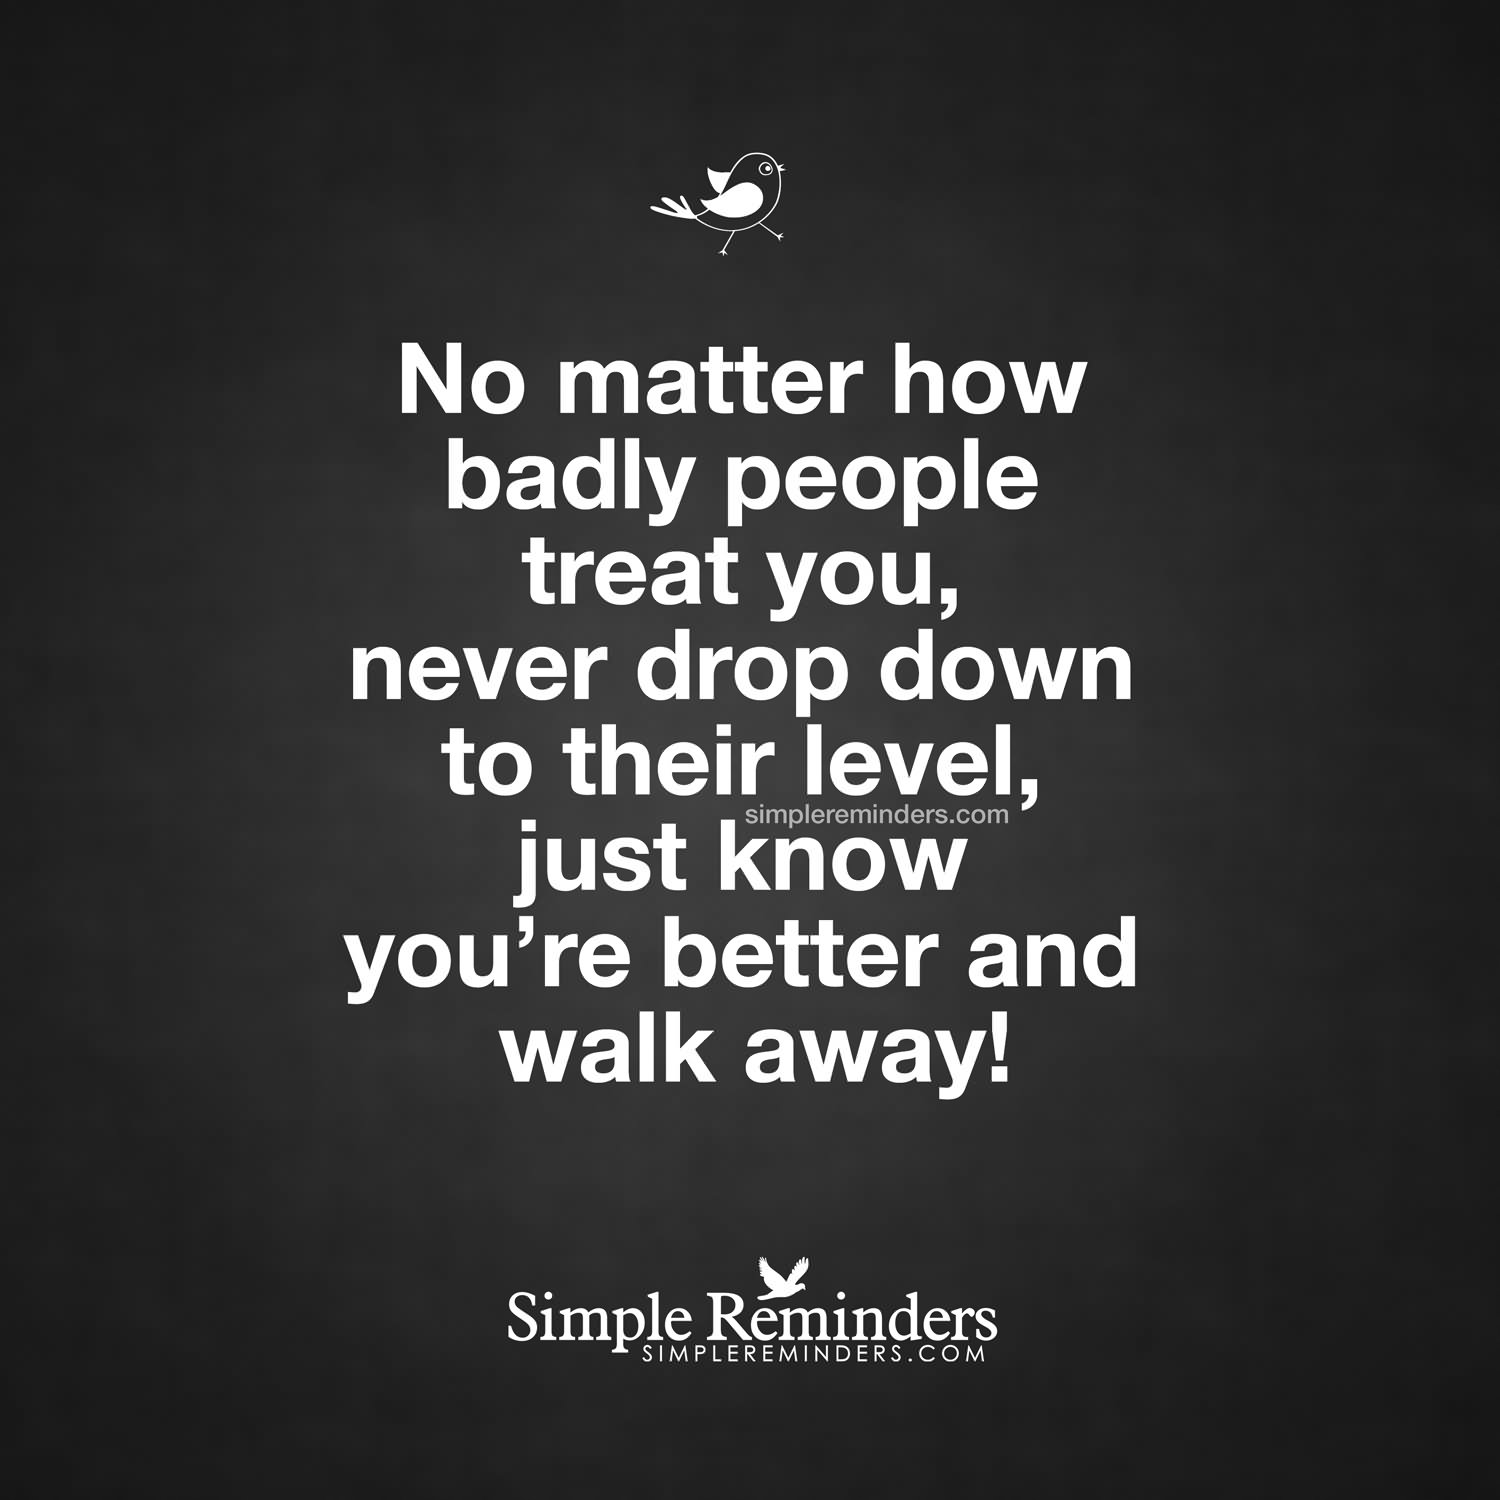 No matter how badly people treat you, never drop down to their level, just know you're better and walk away. (3)